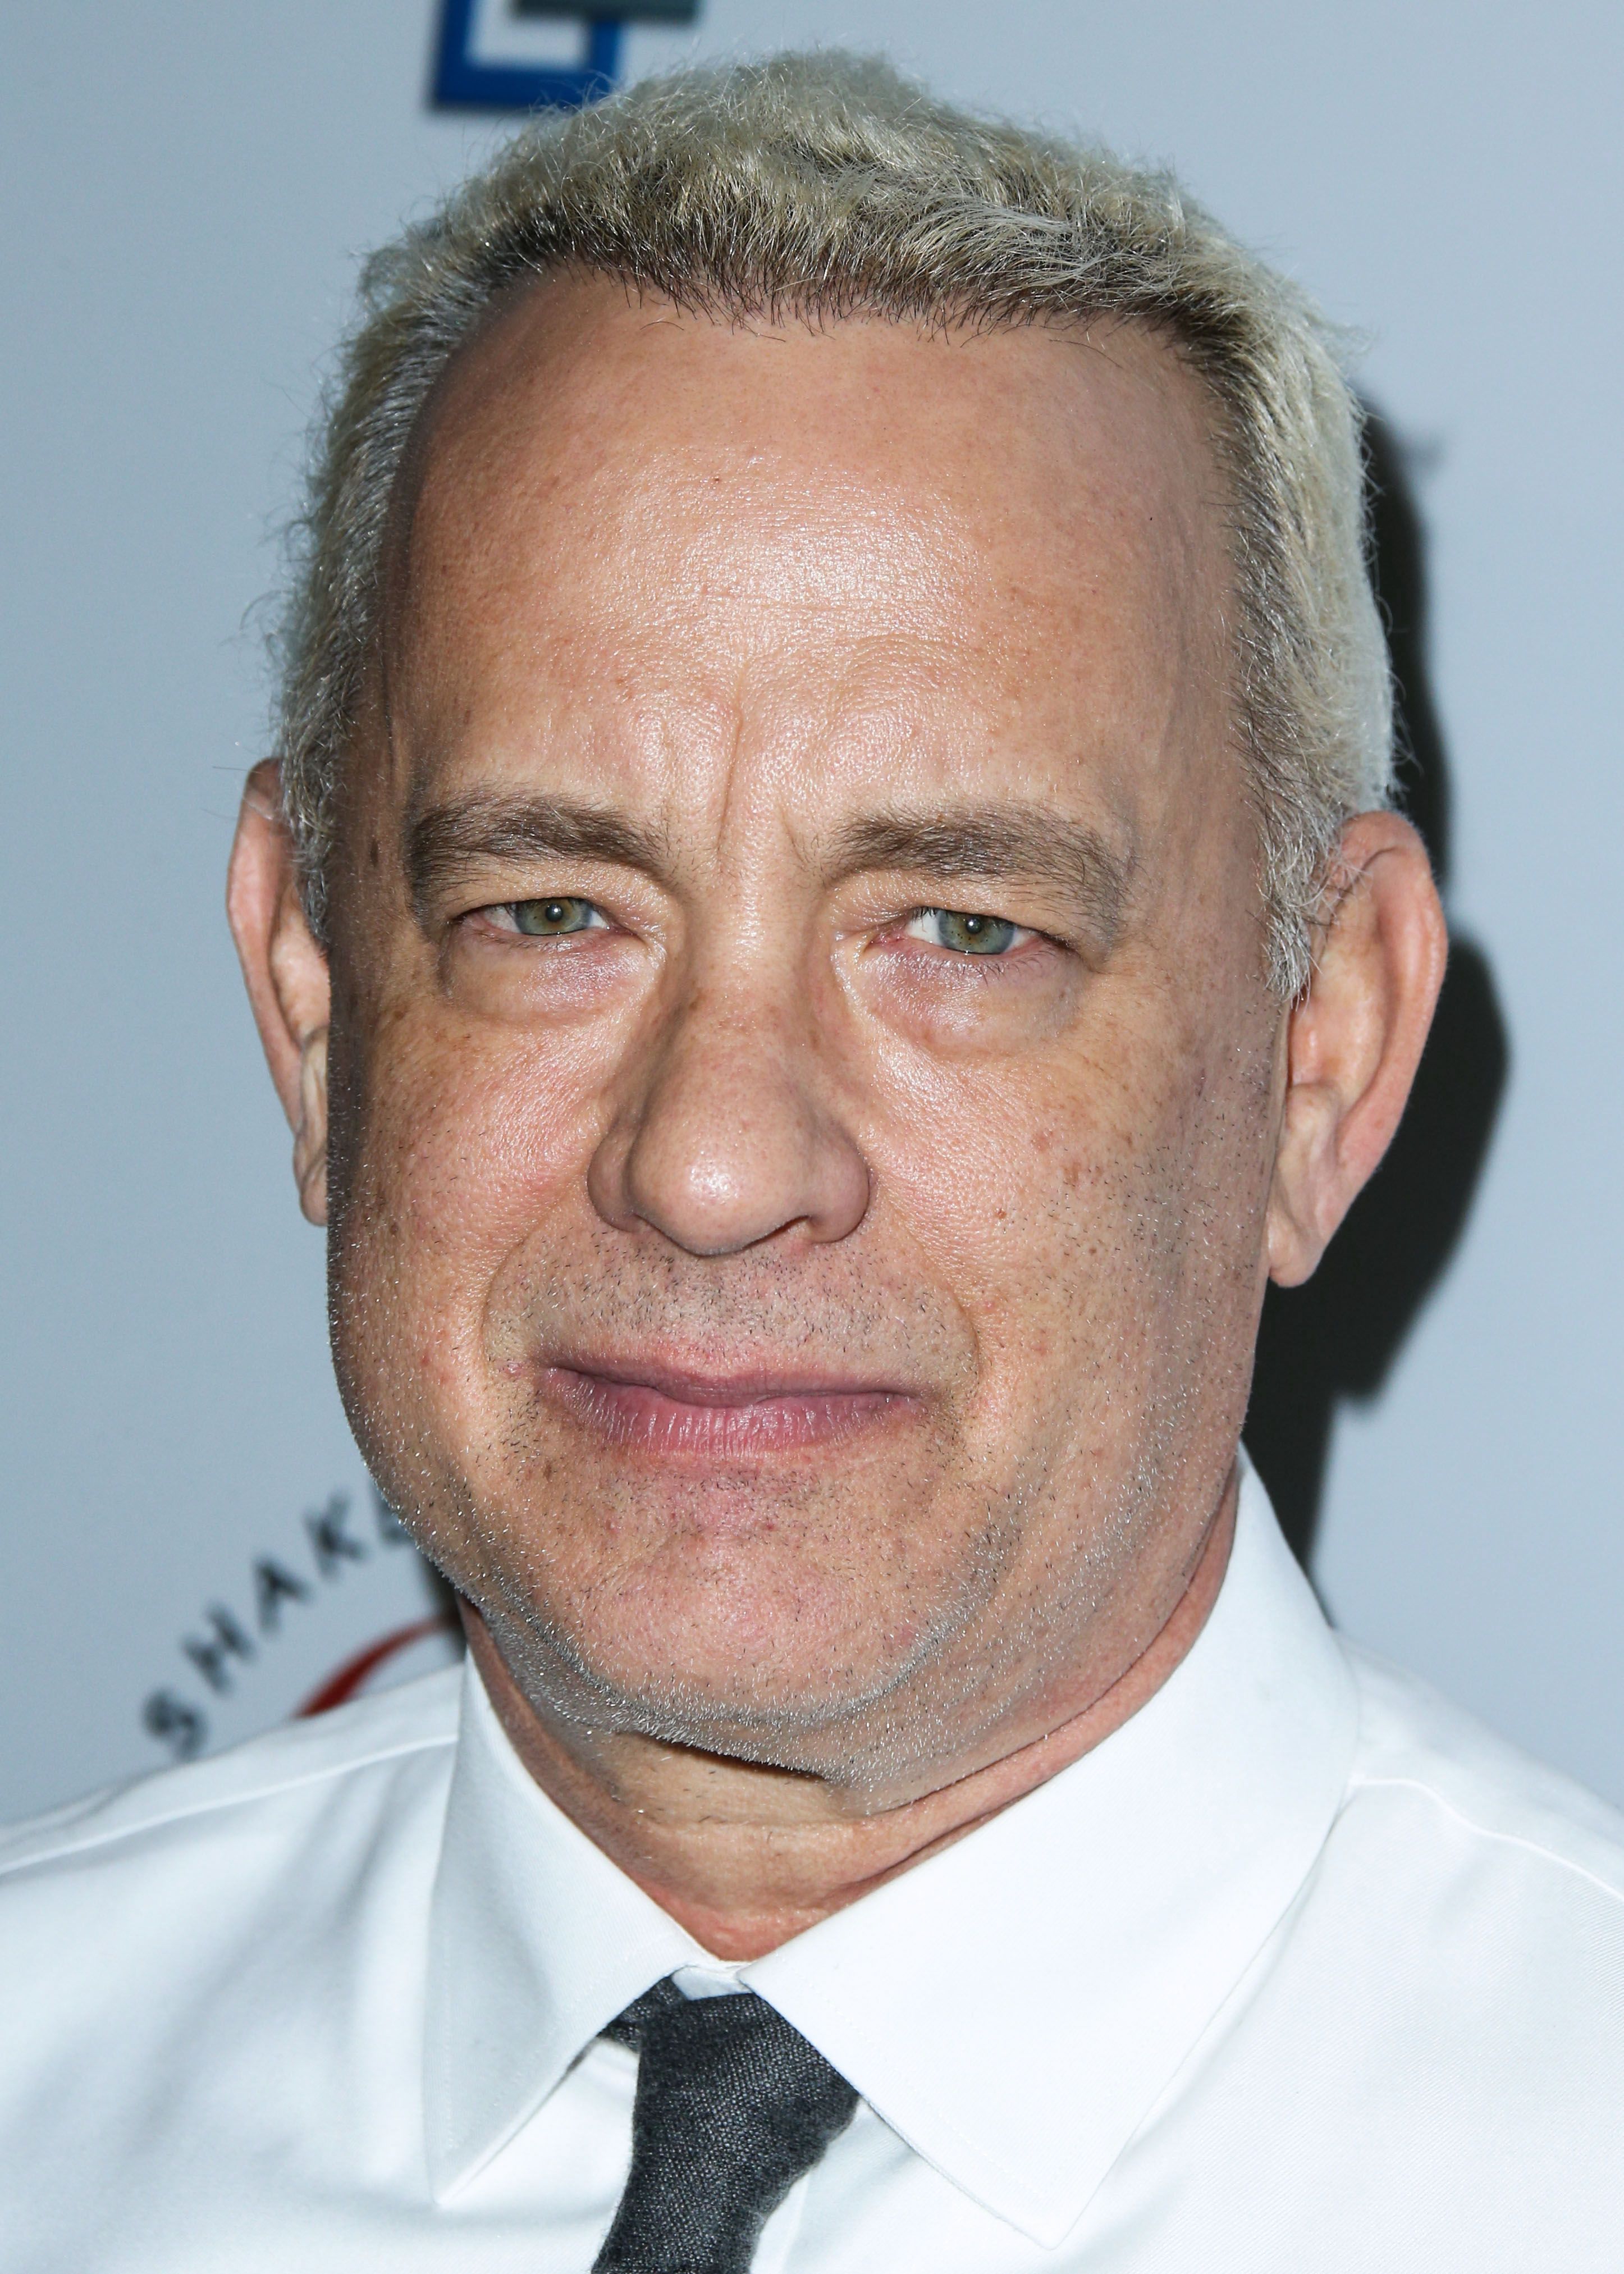 A throwback photo of Tom Hanks looking dashing as ever with the cutest grey hair and green eyes to complement.